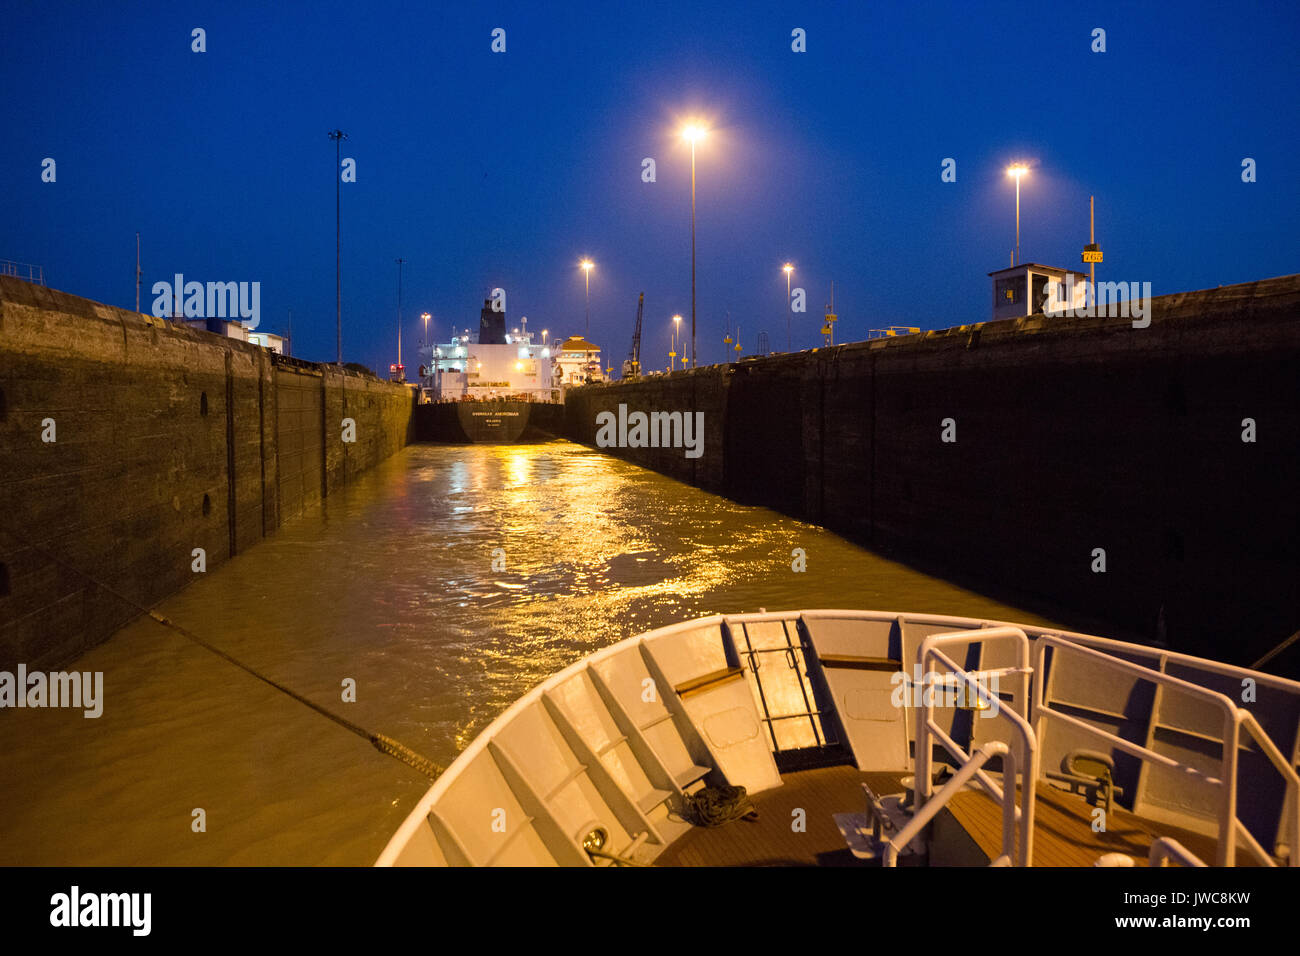 A large shipping vessel and expedition cruise ship are guided through the Pedro Miguel Locks in the Panama Canal. Stock Photo